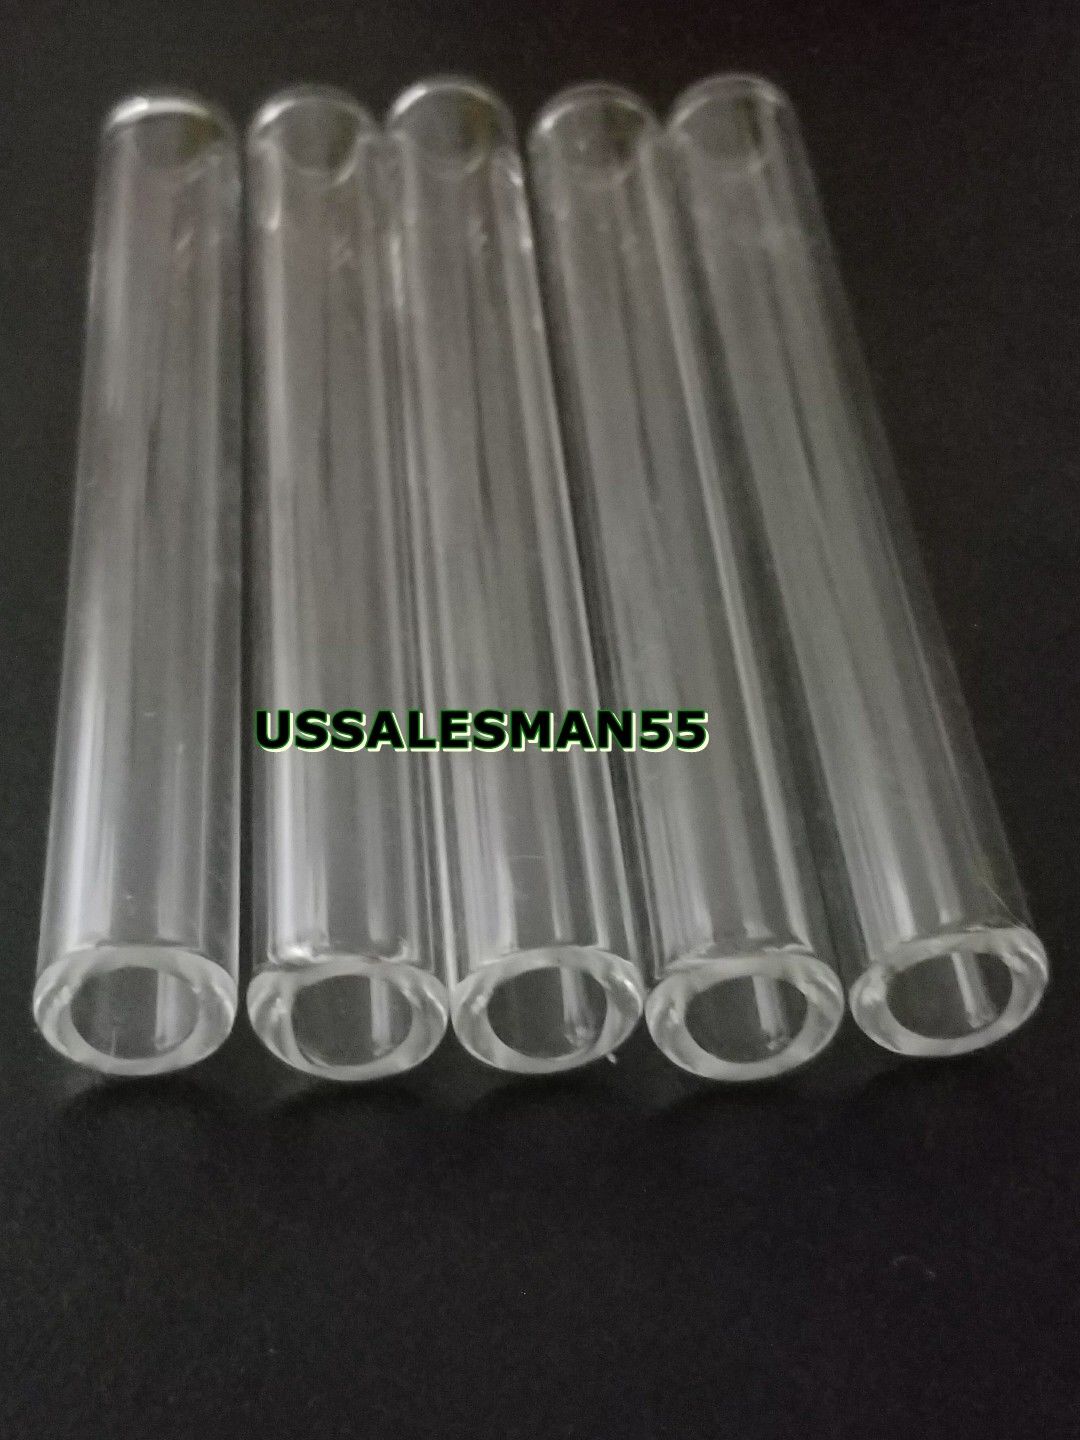 4 Inch Long 5 Piece 12mm Od 8mm Id Pyrex Glass Blowing Tubes 2mm Thick Tubing